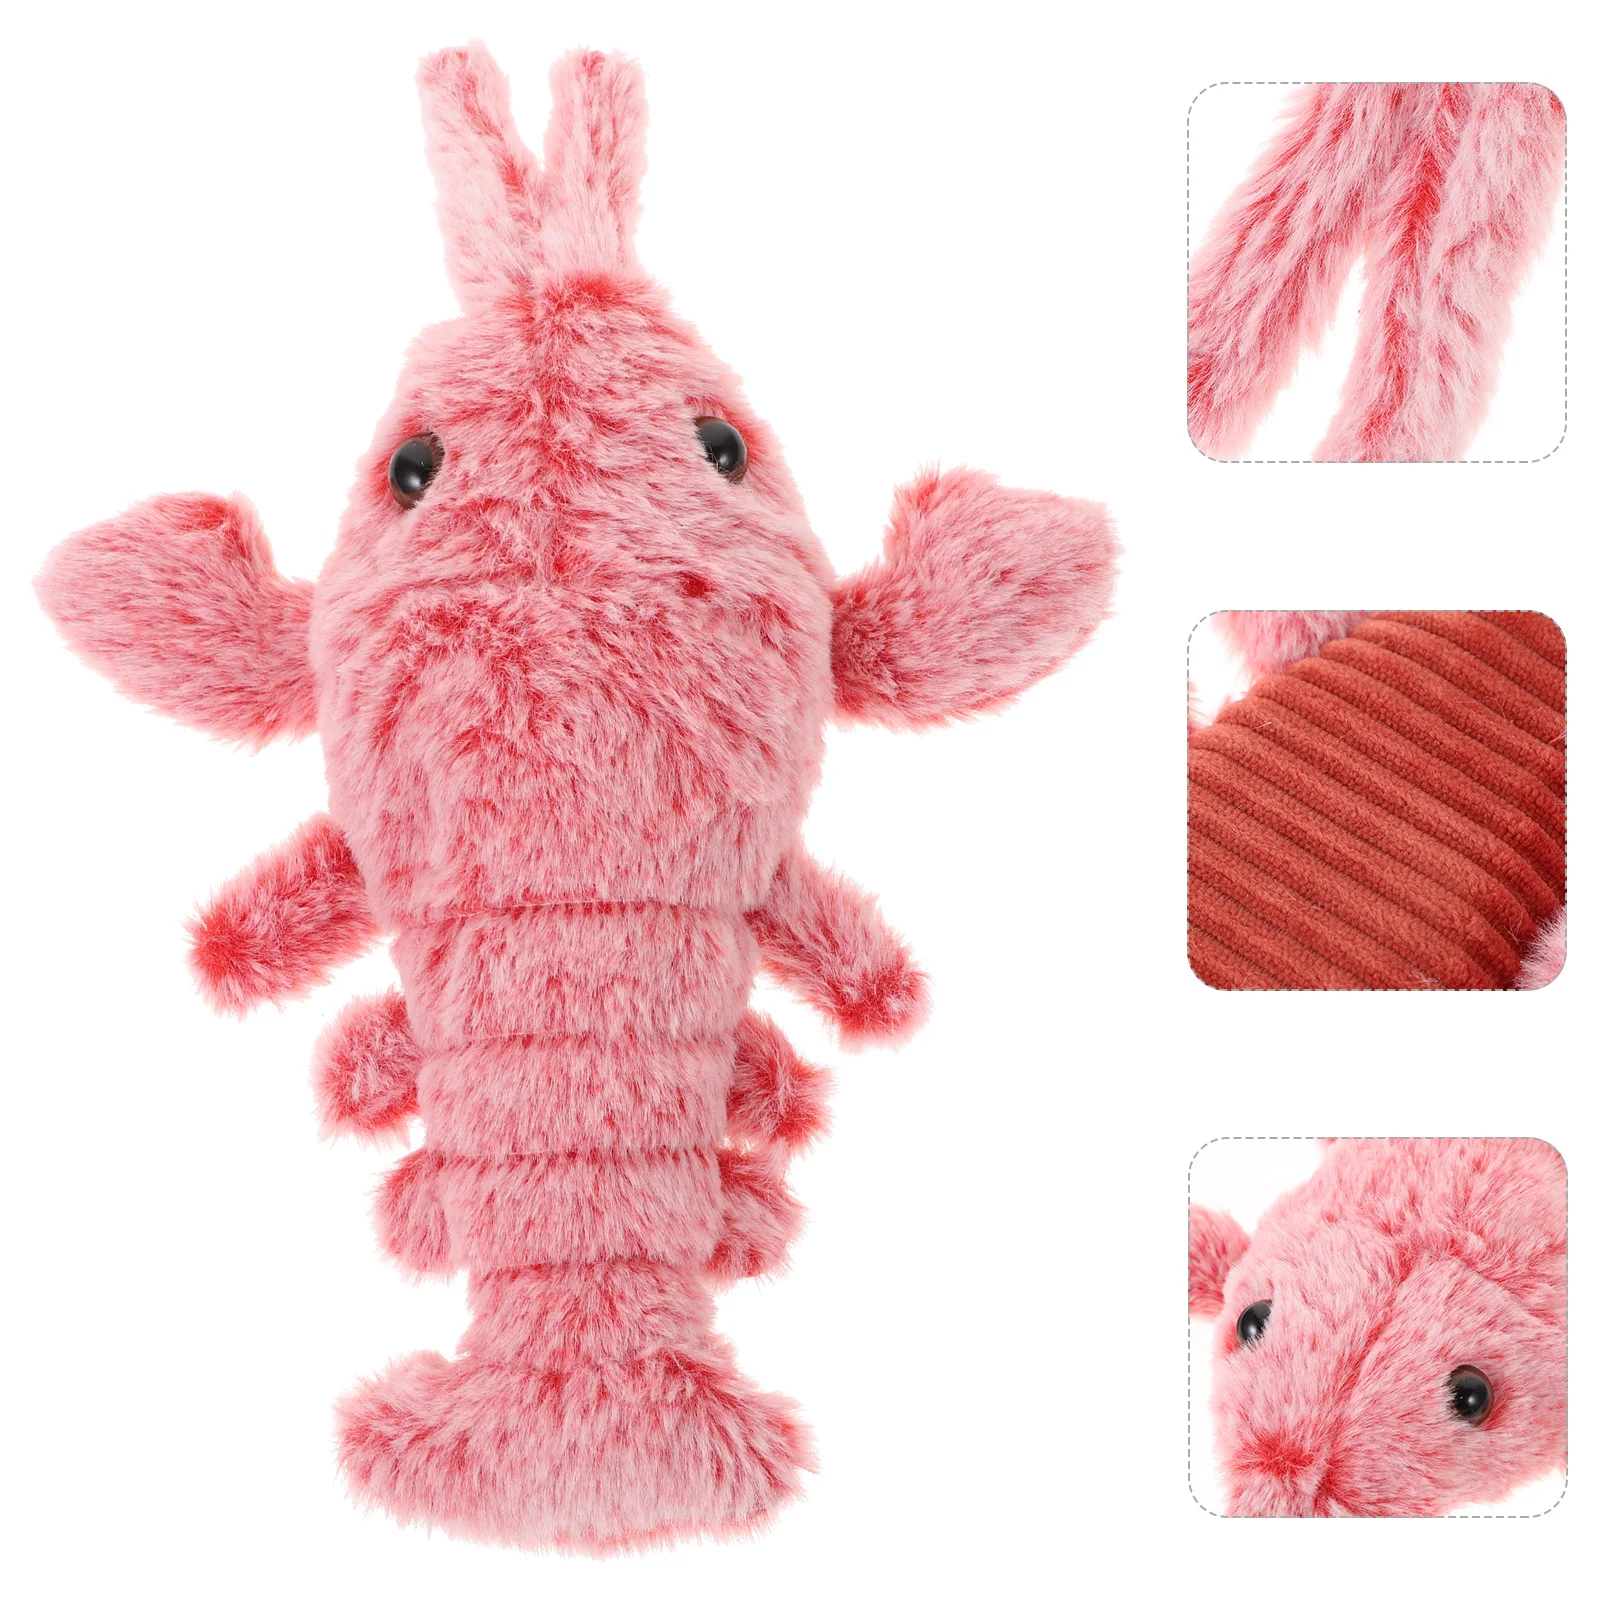 

Cat Toy Toys Lobster Interactive Kitten Electric Plush Catnip Moving Pet Cats Chew Indoor Flopping Floppy Stuffed Kids Nip